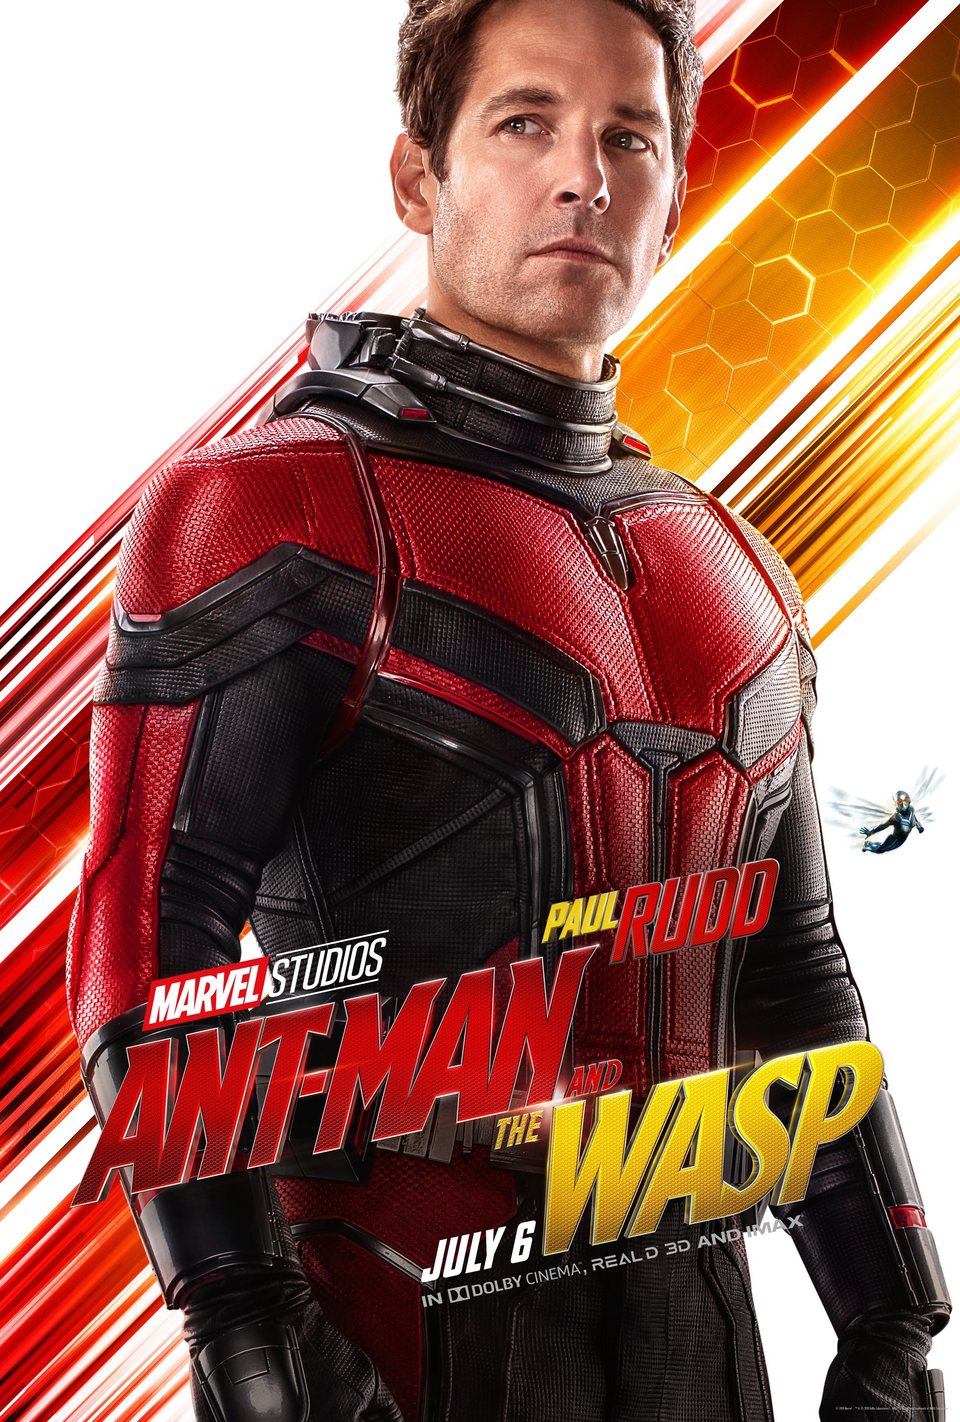 Poster of Ant-Man and the Wasp - Póster Paul Rudd